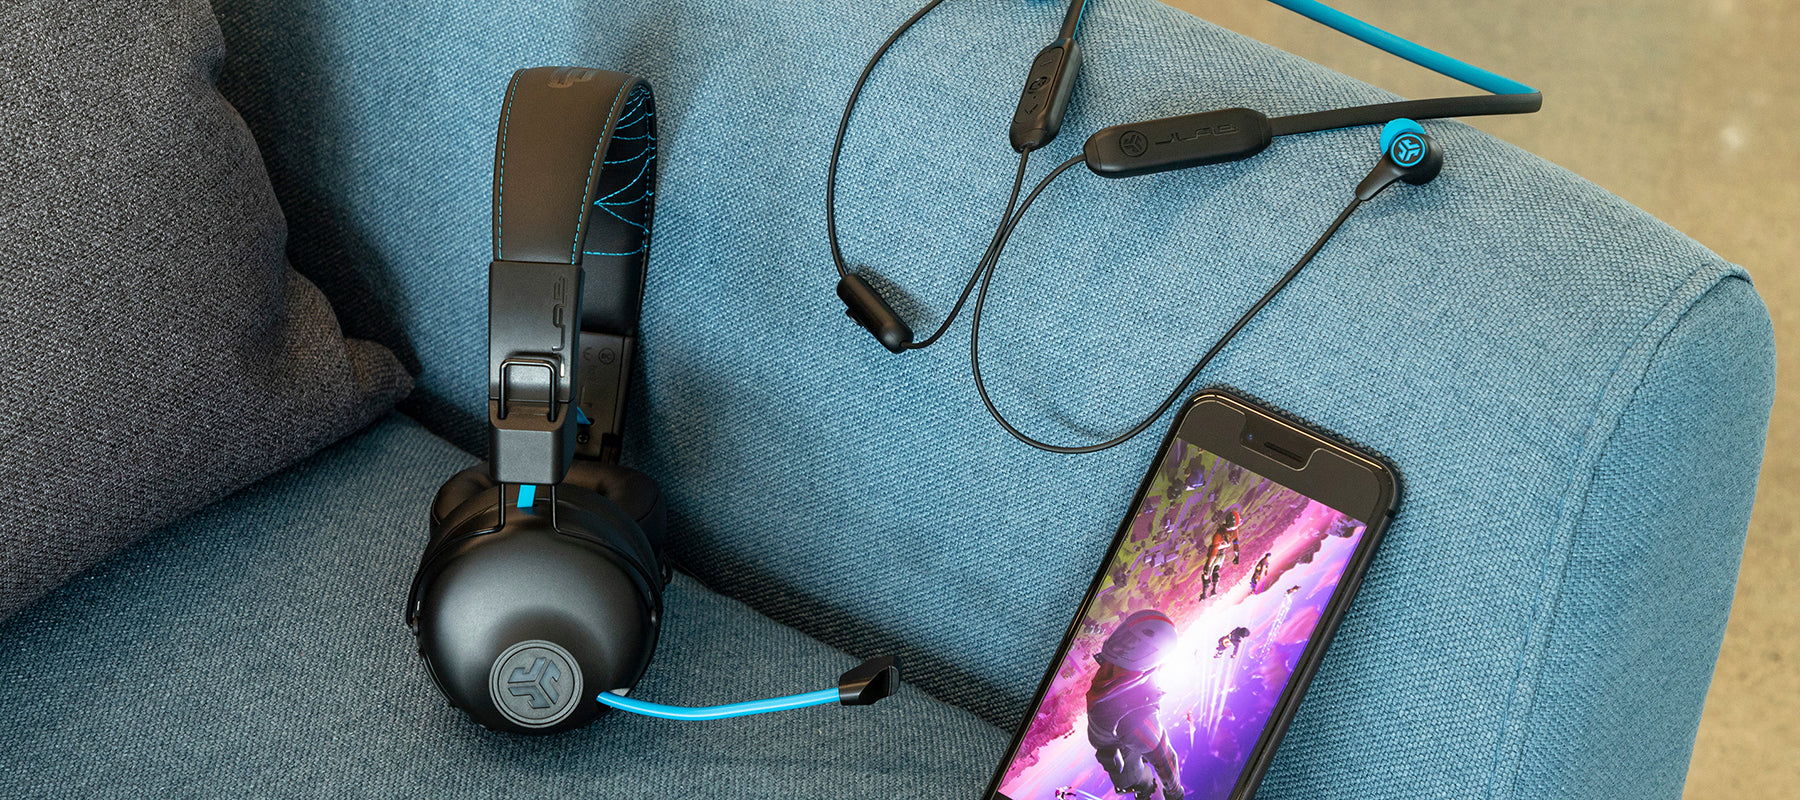 JLab Audio Launches First-Ever Gaming Headphone Models